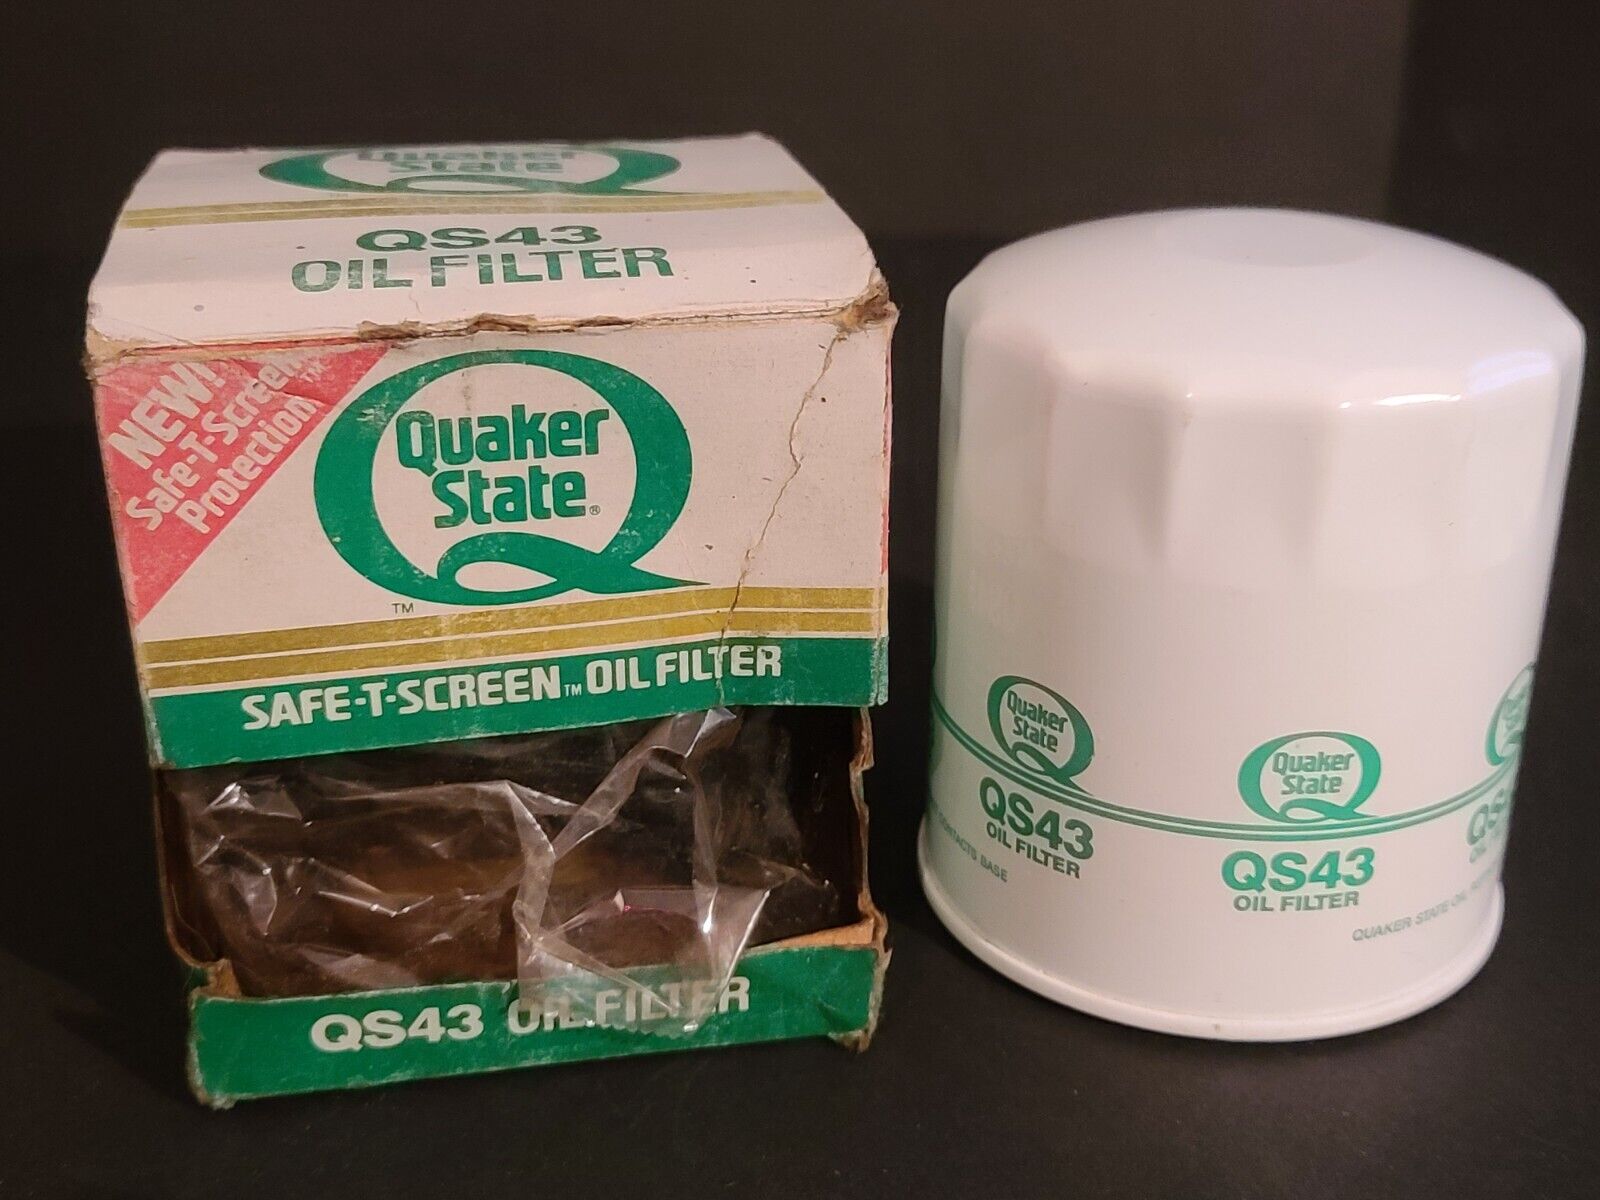 NEW Quaker State Oil Filter QS43 for 73-81 CHRYSLER TOWN & COUNTRY